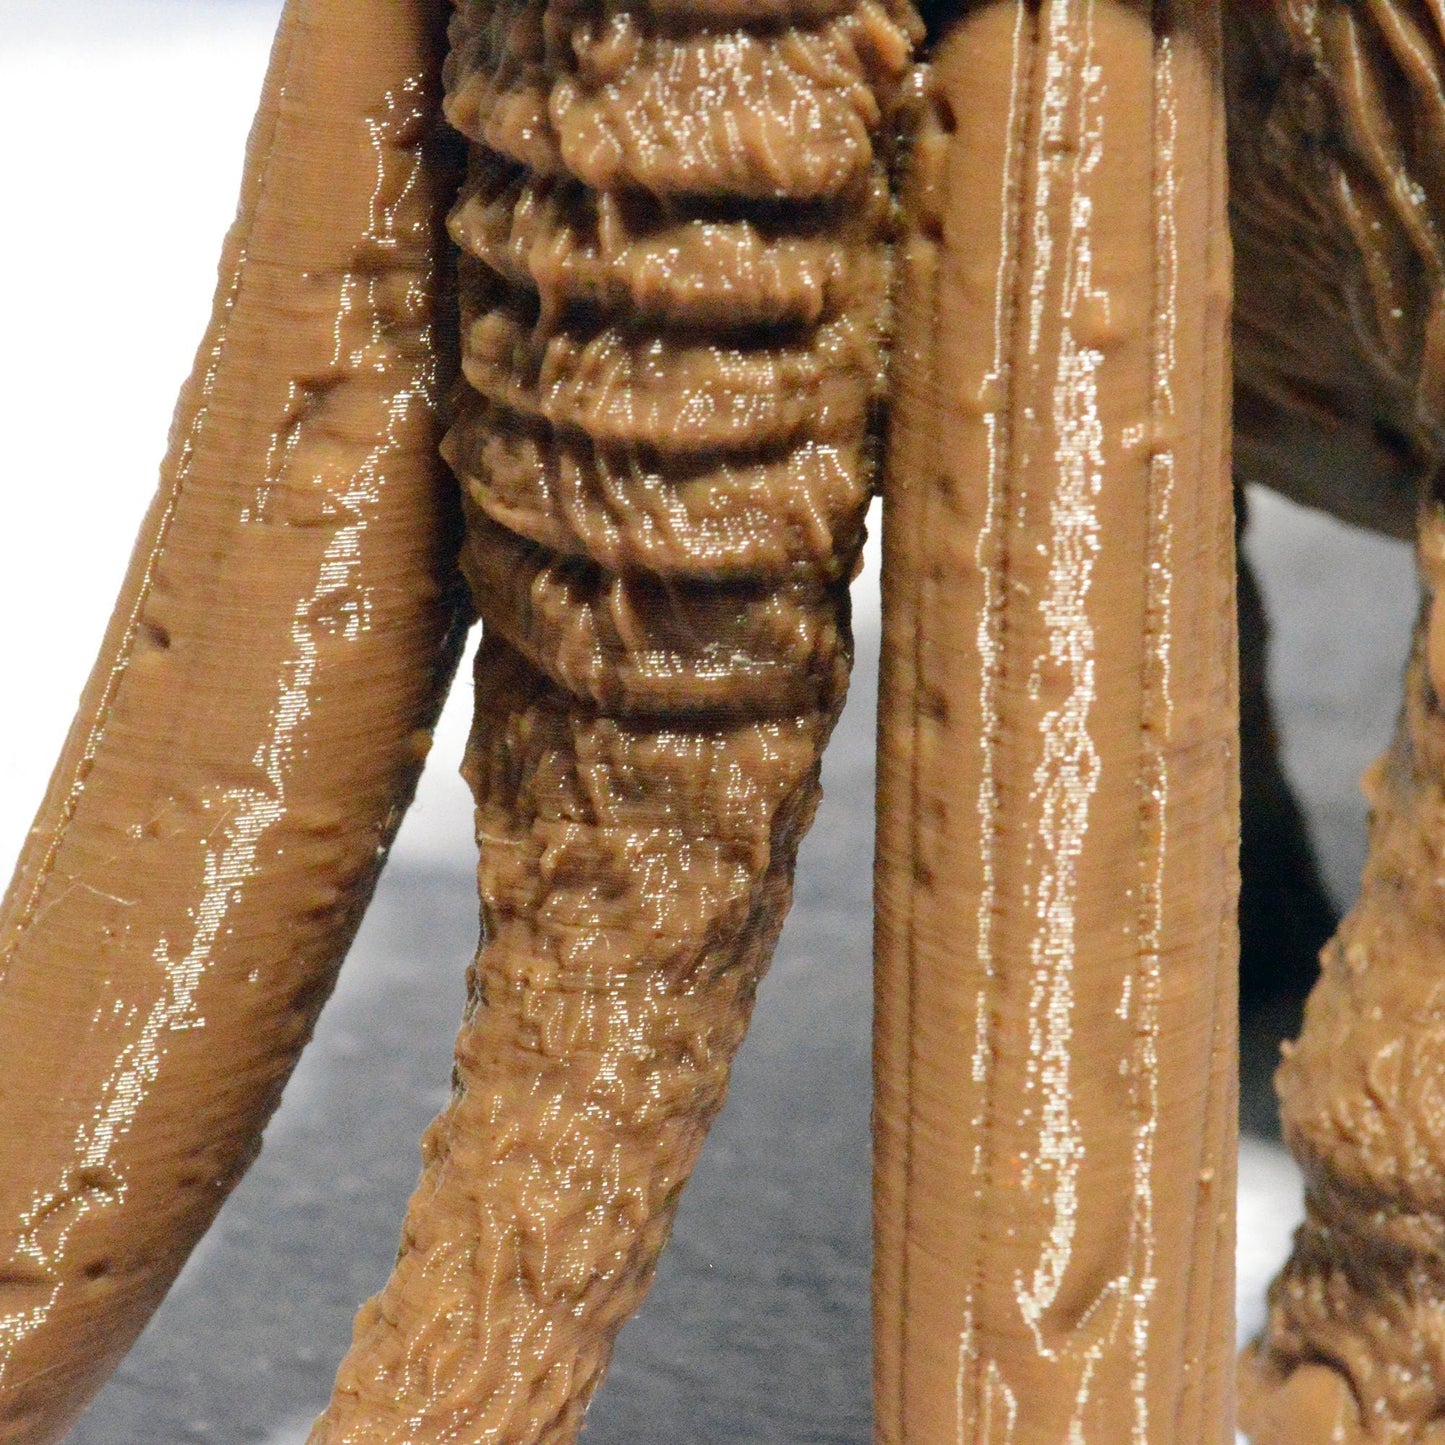 Miniature Wooly Mammoth 15mm 28mm 32mm 56mm for D&D Icewind Dale Terrain, DnD Pathfinder Arctic Frozen Snowy Icy Animal, Diorama Terrain